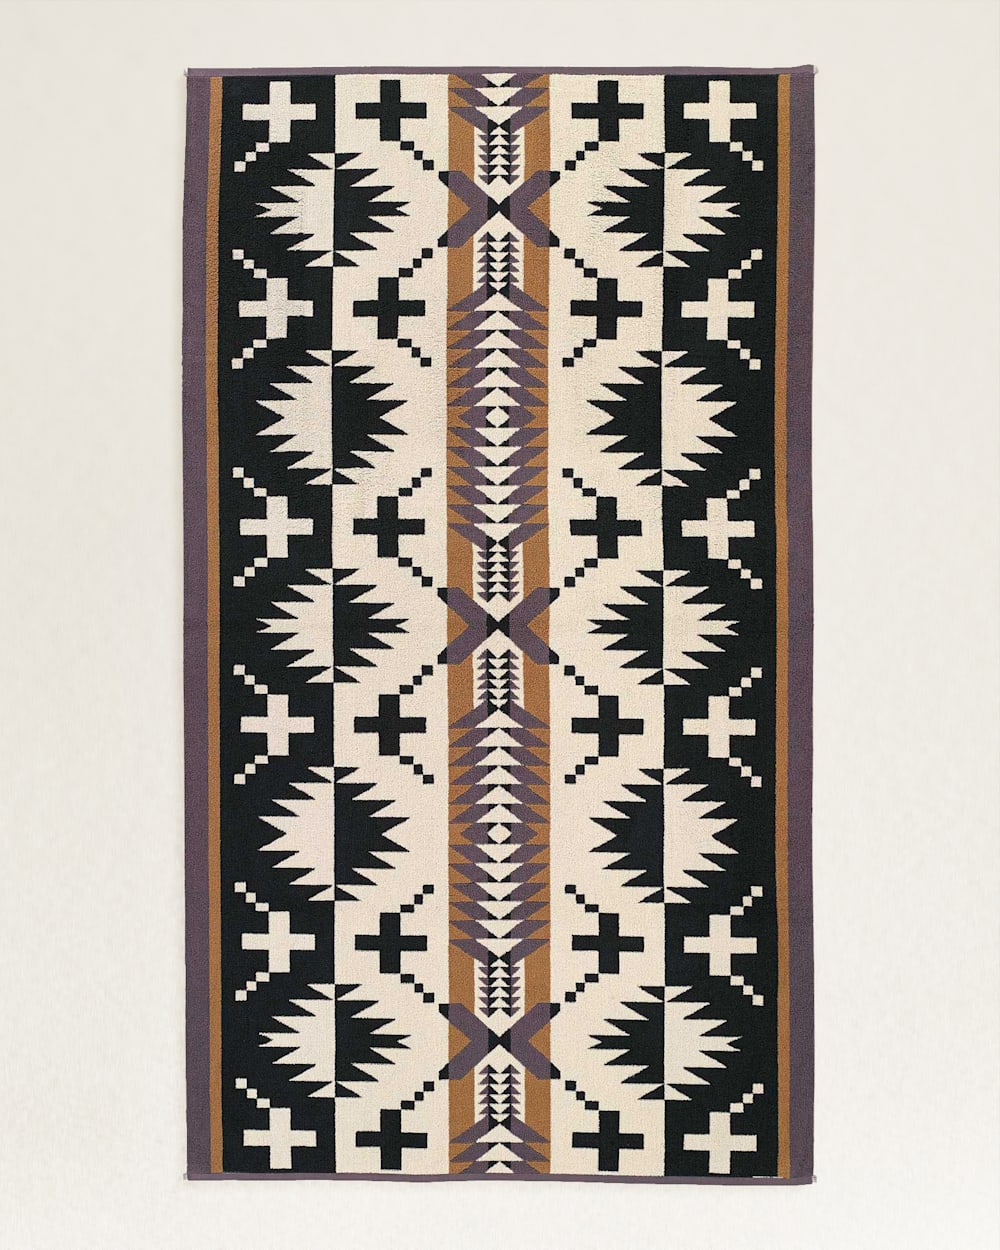 A traditional geometric patterned rug featuring a symmetrical design in black, white, and earth tones, with repeated motifs of crosses and diamond shapes, perfect for a Scottsdale Arizona bungalow by Pendleton/Babblitt's Wholesale.